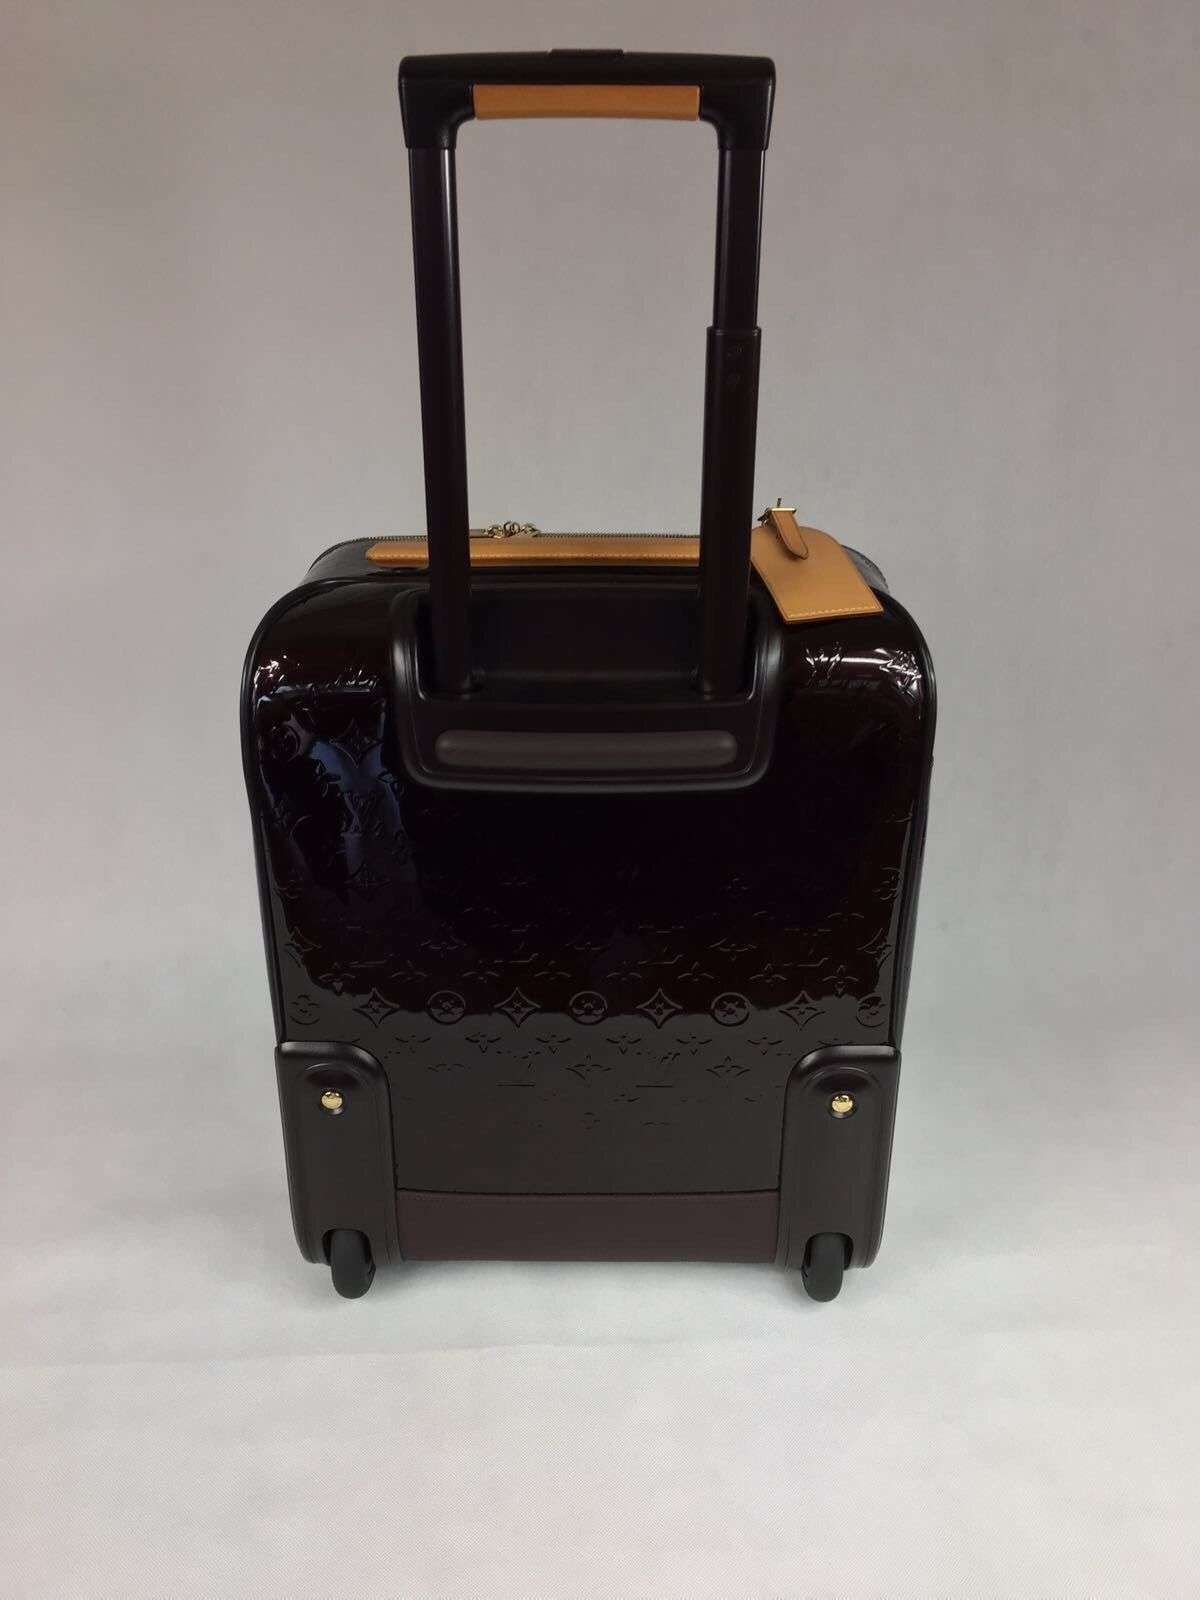 Louis Vuitton Luggage Carry On Replica | Confederated Tribes of the Umatilla Indian Reservation